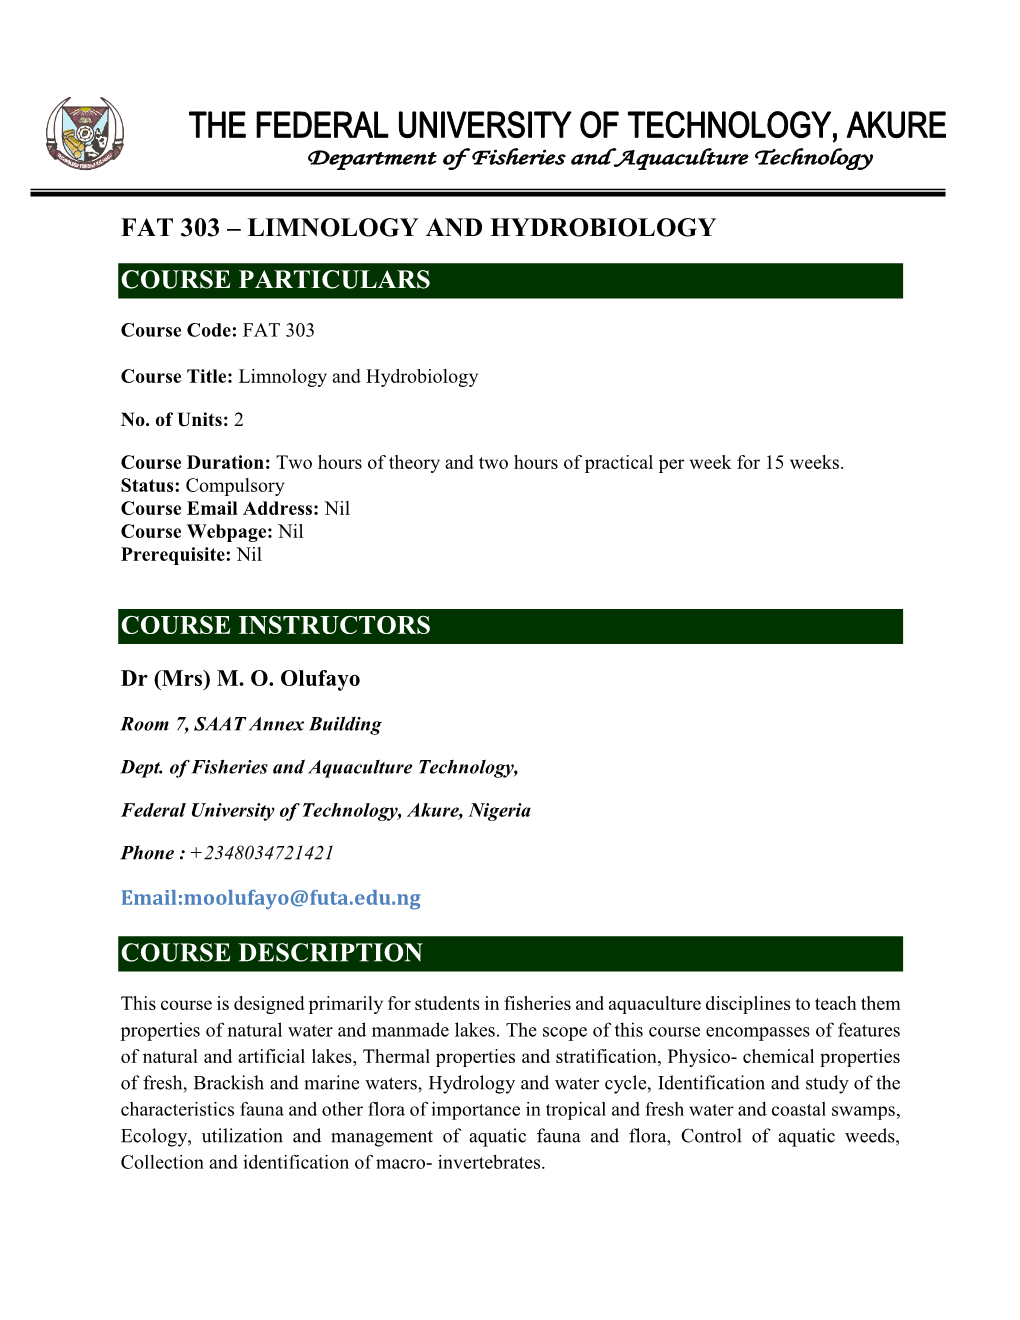 Fat 303 – Limnology and Hydrobiology Course Particulars